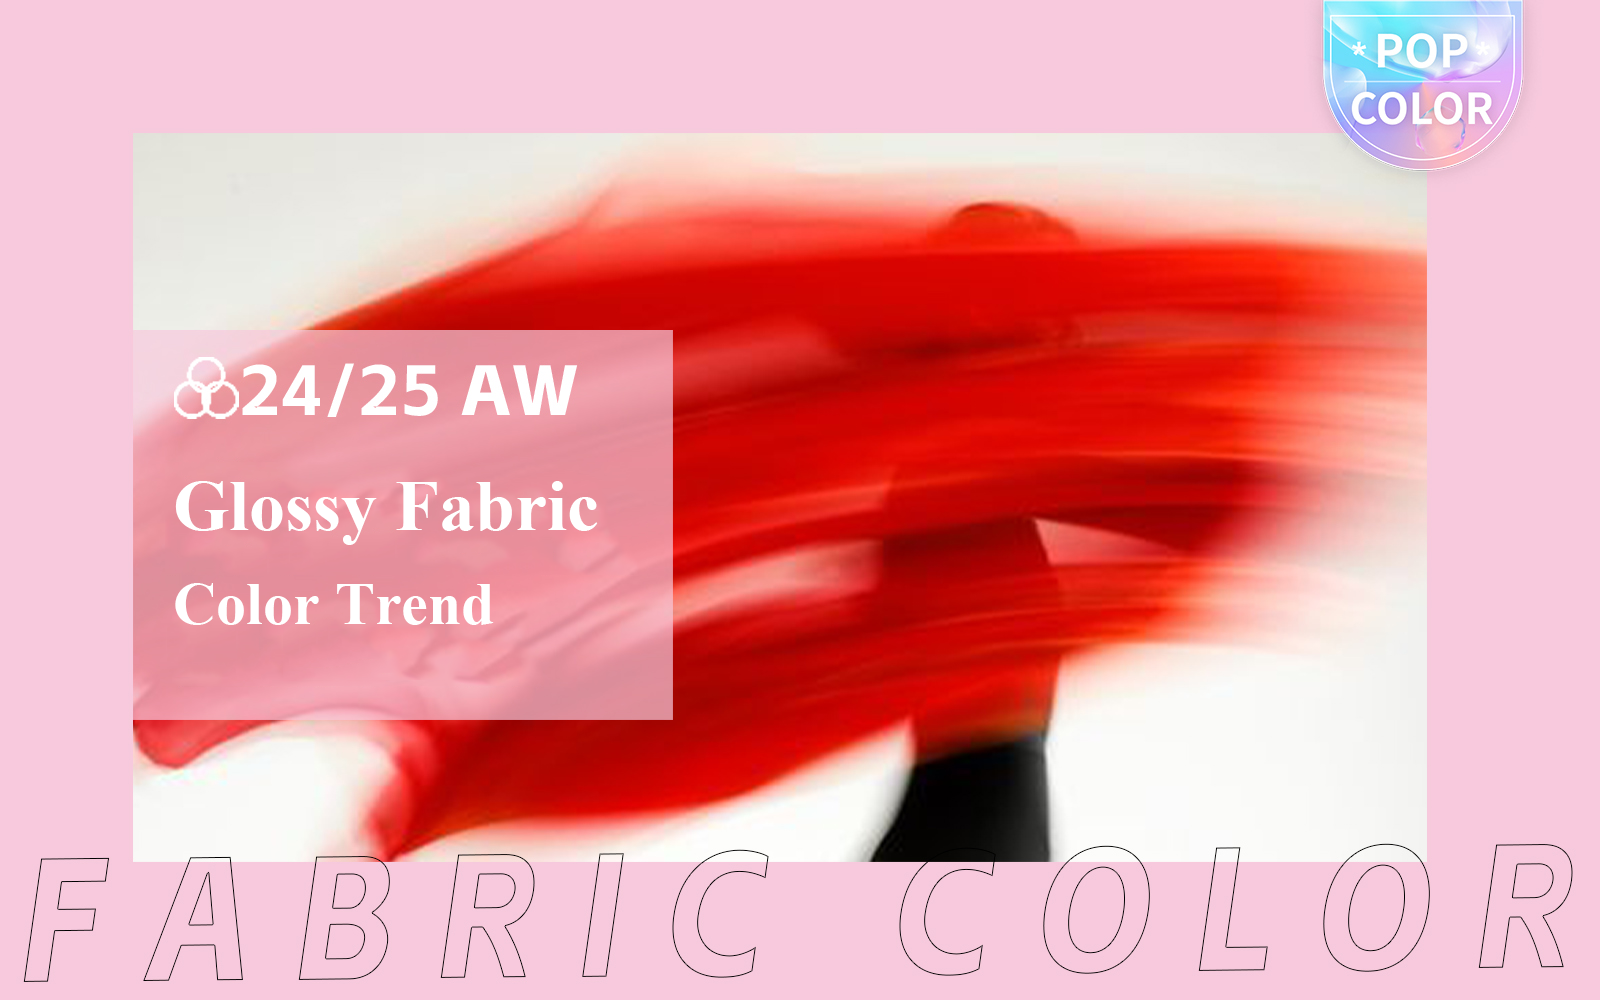 A/W 24/25 Key Color Trend for Women's Glossy Fabric